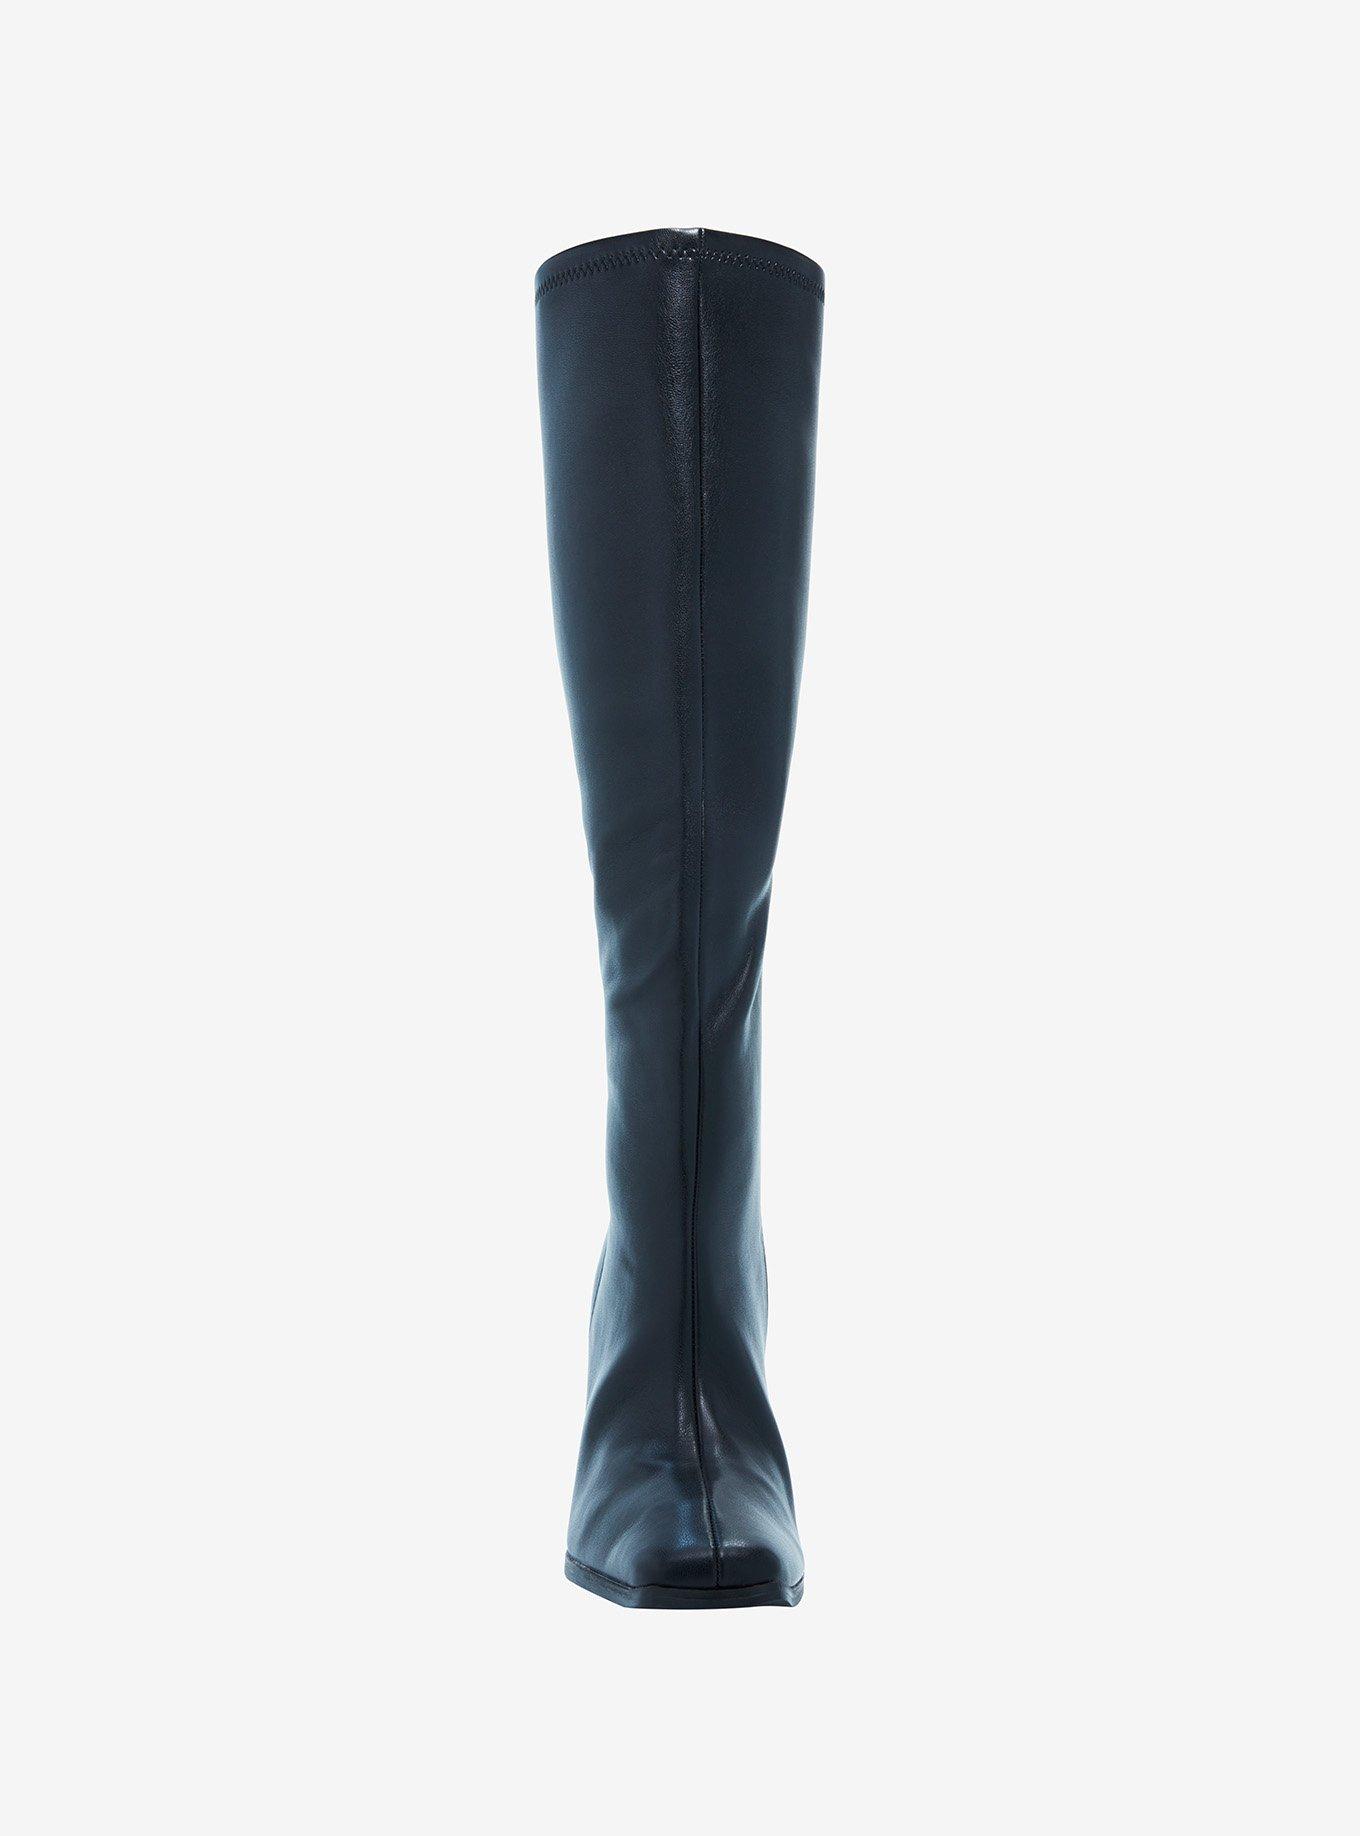 Chinese Laundry Black Square Toe Knee-High Boots, MULTI, alternate